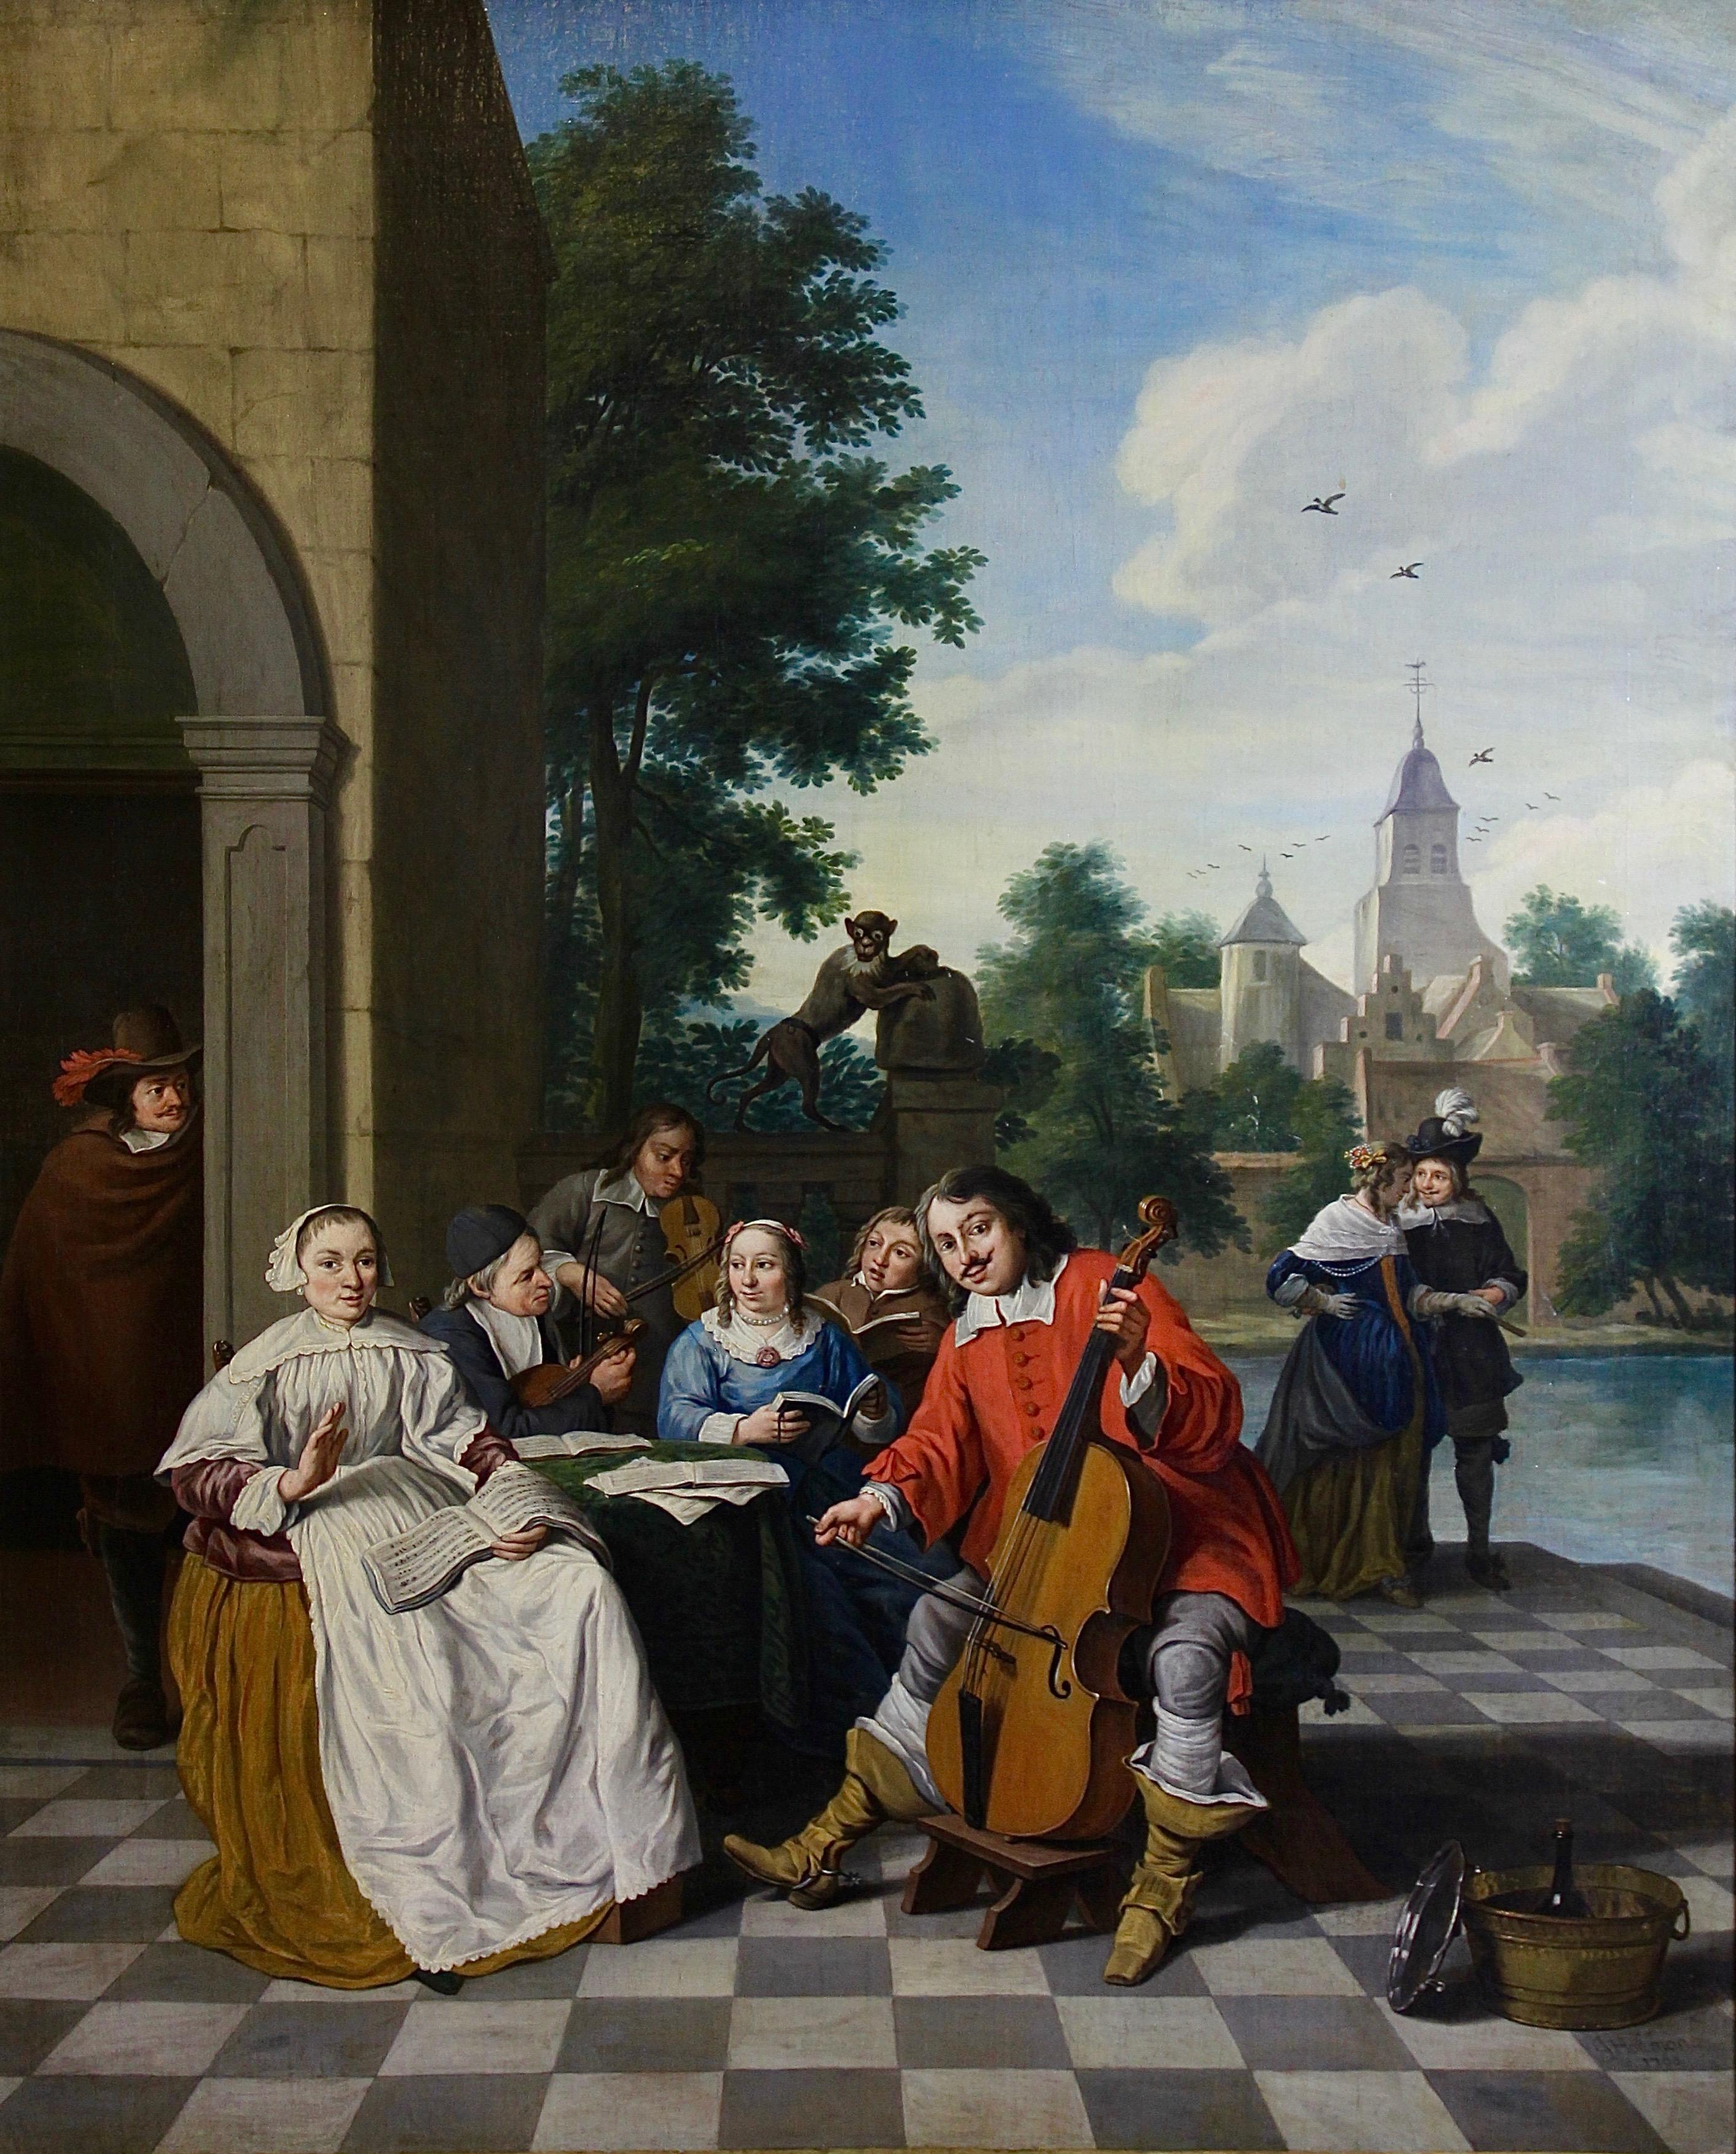 Jan Jozef Horemans, The Younger Figurative Painting - 1760 Flemish Baroque oil painting. Romantic scene. Signed and dated.